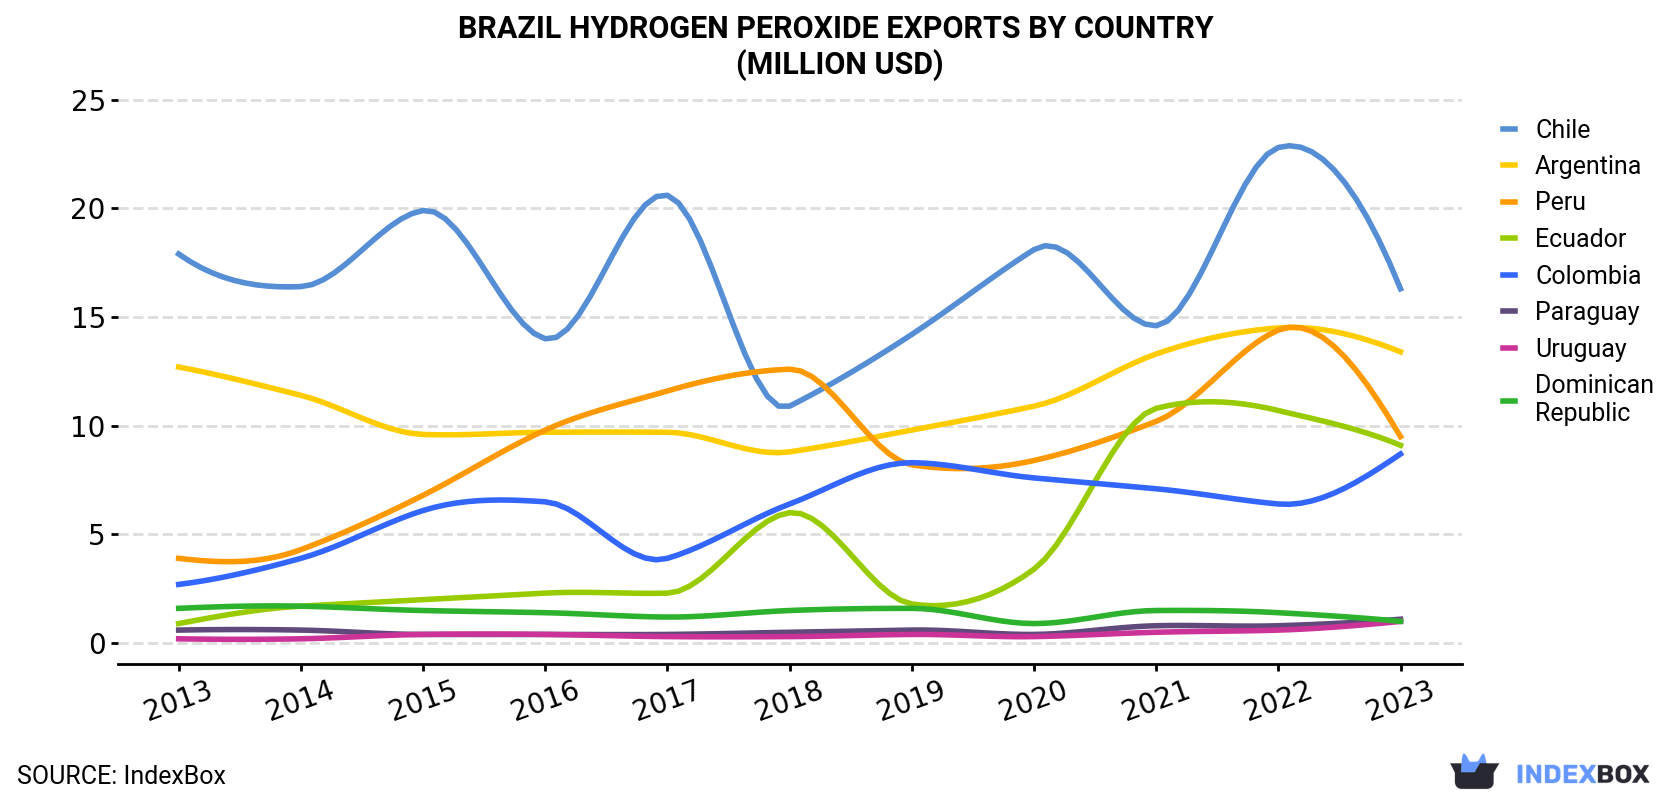 Brazil Hydrogen Peroxide Exports By Country (Million USD)